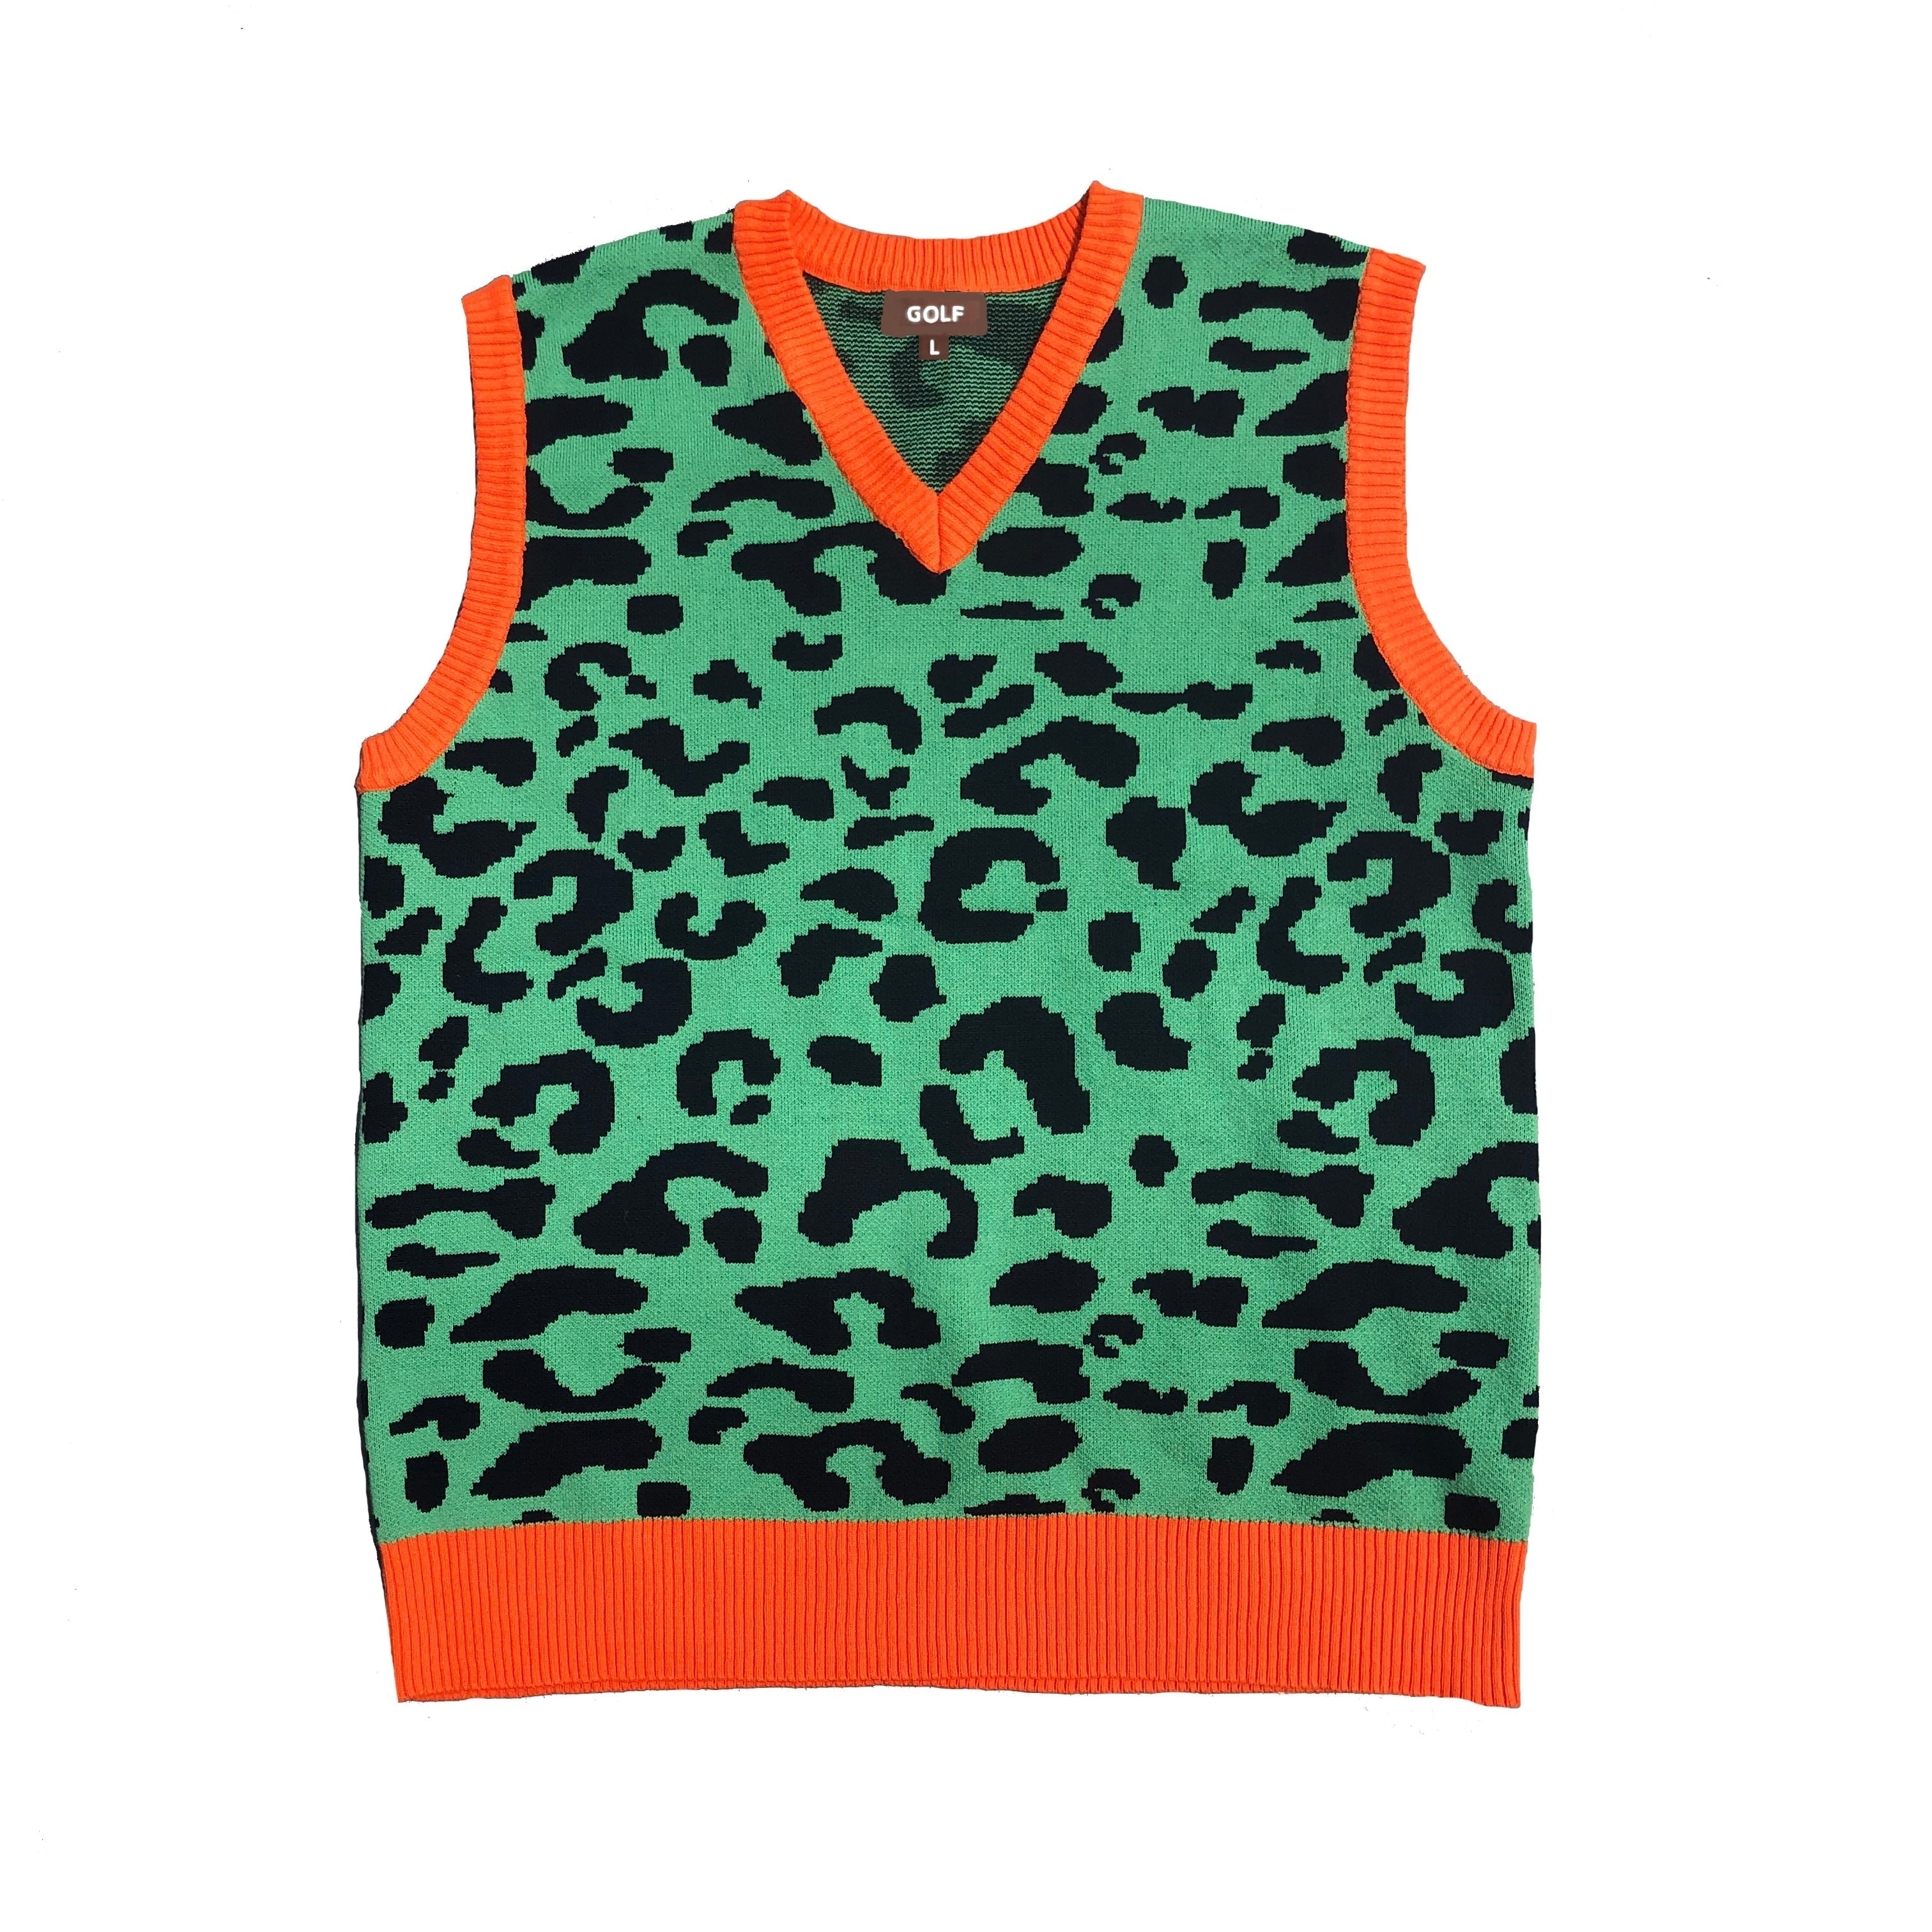 New leopard men Luxury golf Camouflage Le Fleur Tyler The Creator Knit Casual Sweaters Vest sleeveless Asian Size Drake #M14